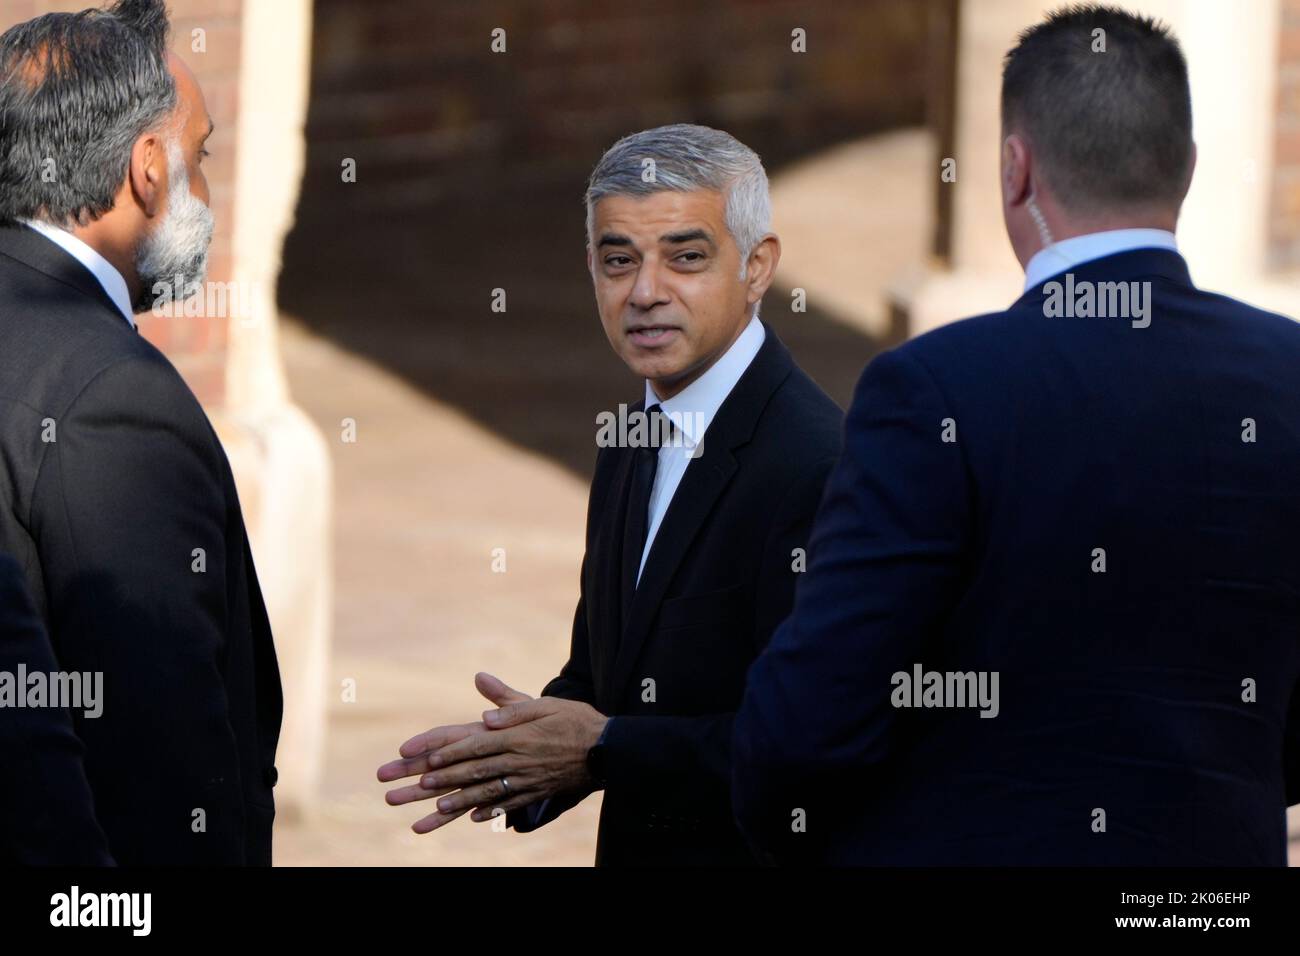 London Mayor Sadiq Khan talks to security as he arrives at St James's Palace, London, before the Accession Council ceremony, where King Charles III is formally proclaimed monarch. Charles automatically became King on the death of his mother, but the Accession Council, attended by Privy Councillors, confirms his role. Picture date: Saturday September 10, 2022. Stock Photo